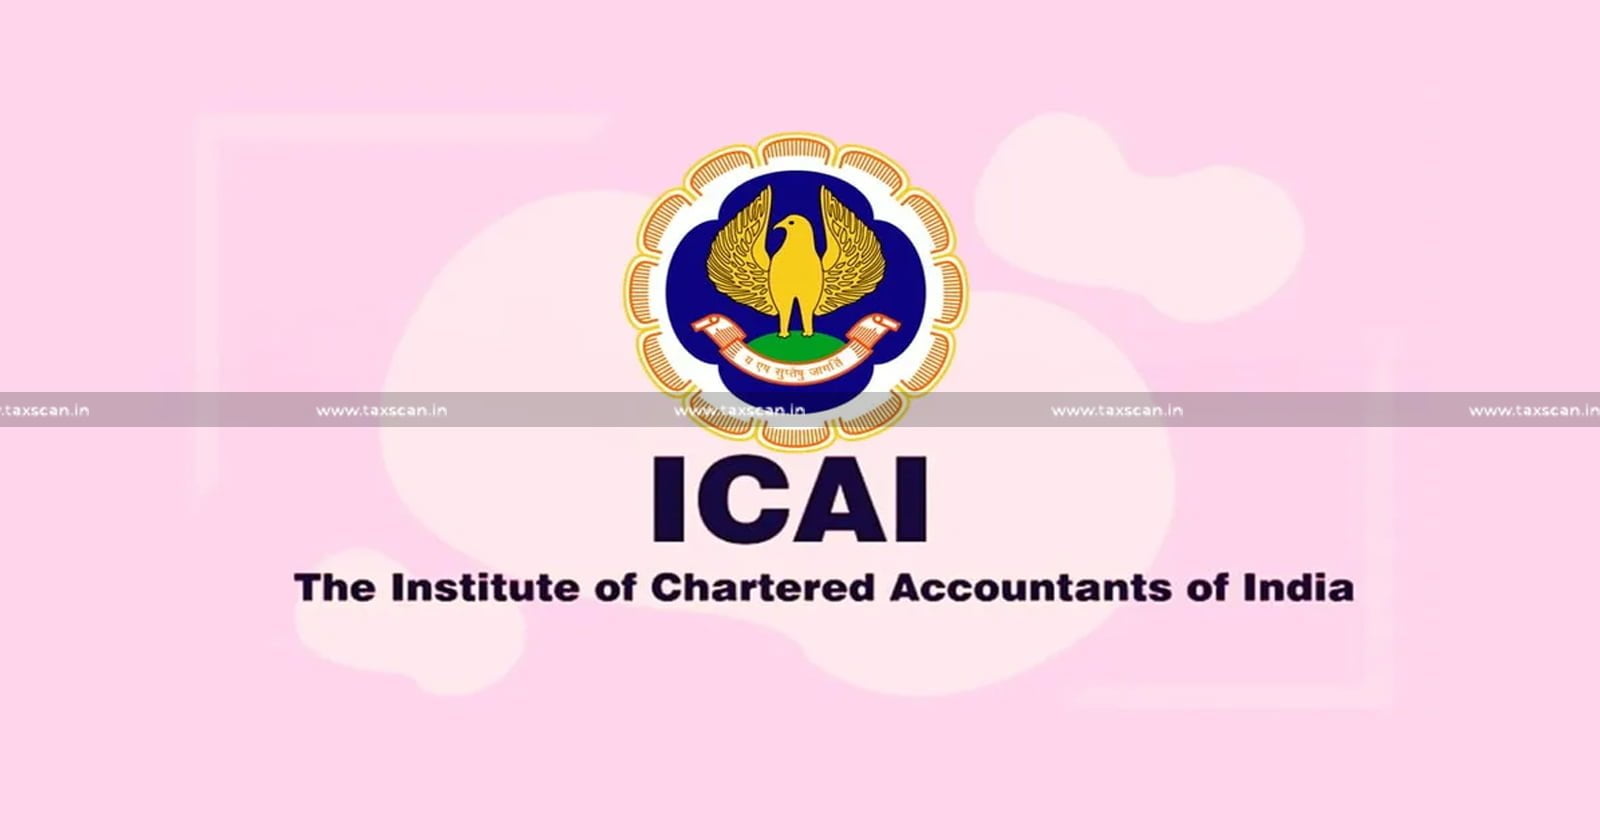 ICAI - Technical Guide - Disclosure - Key Performance Indicators - KPIs - Offer Documents - Chartered Accountants - taxscan